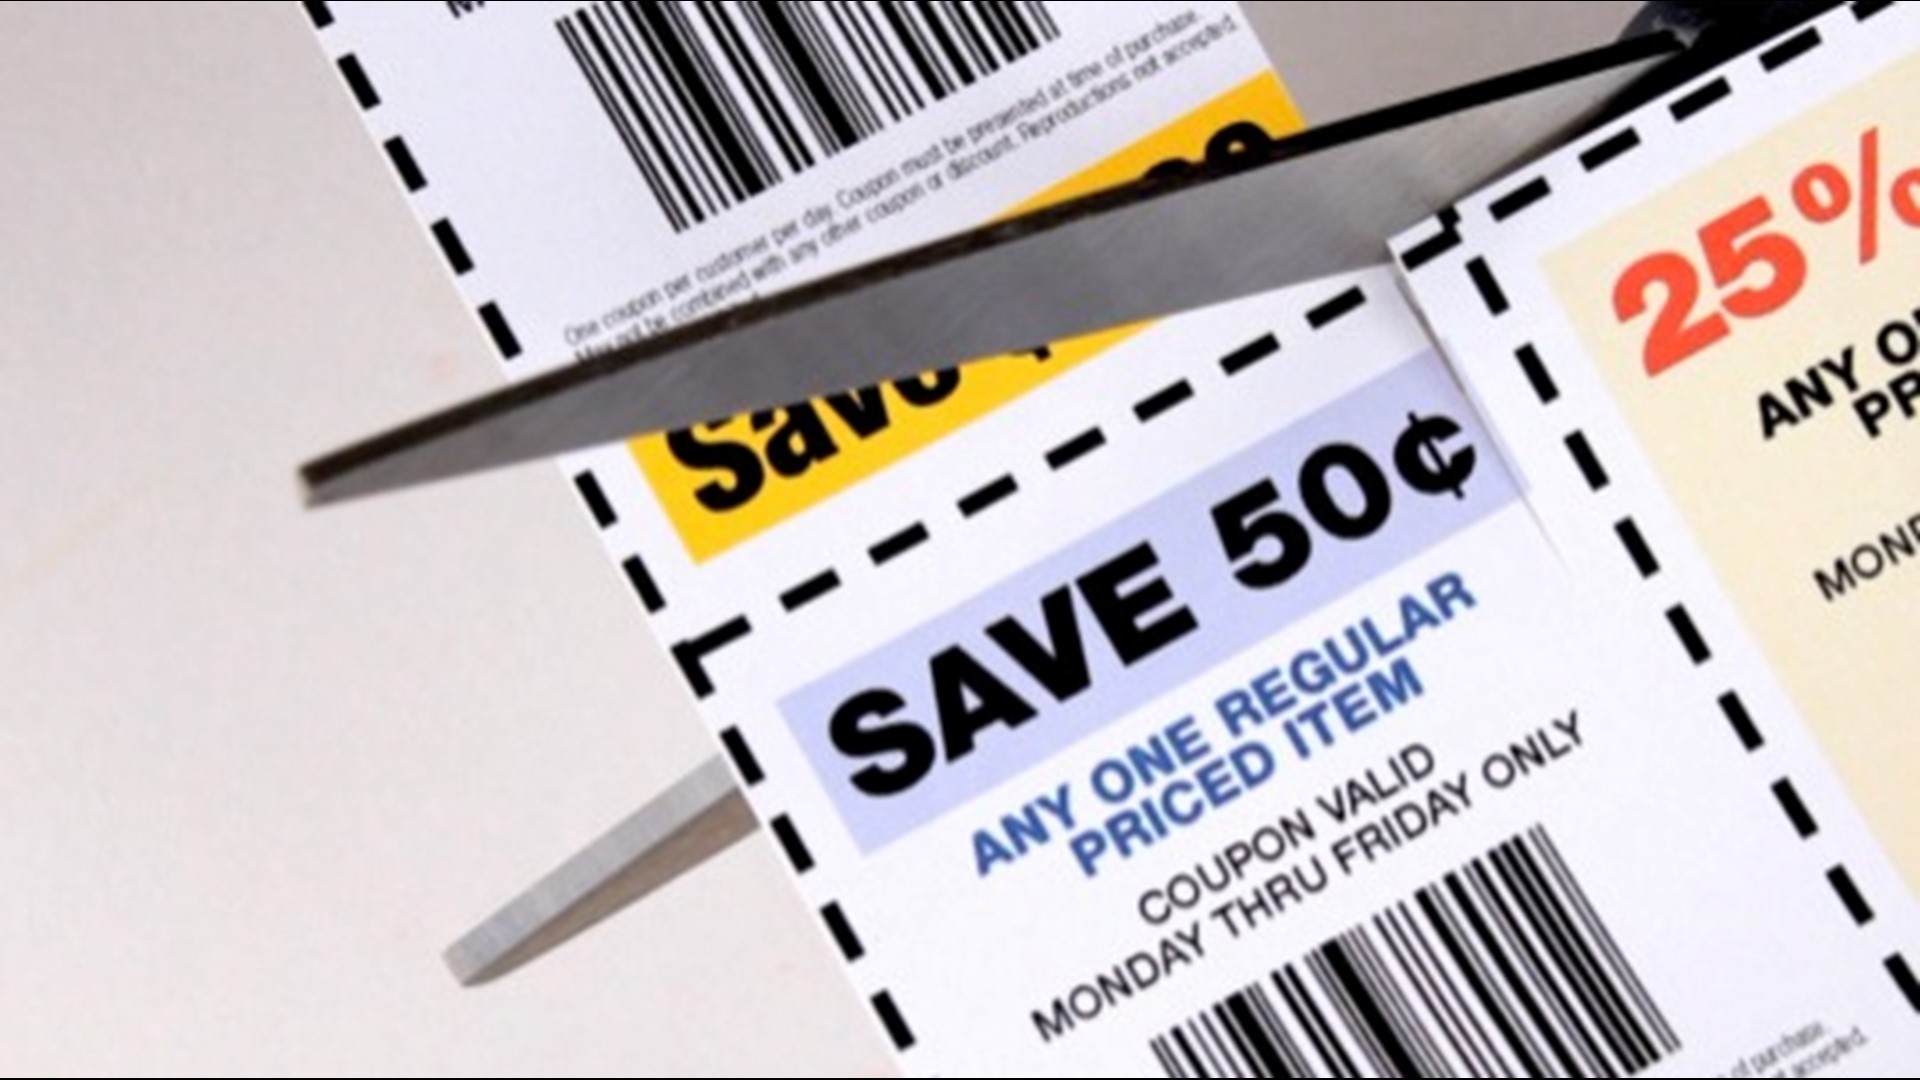 Coupons are basically free money, and in stores where you can double up on coupons the savings are even better. Buzz60's Johana Restrepo has more.